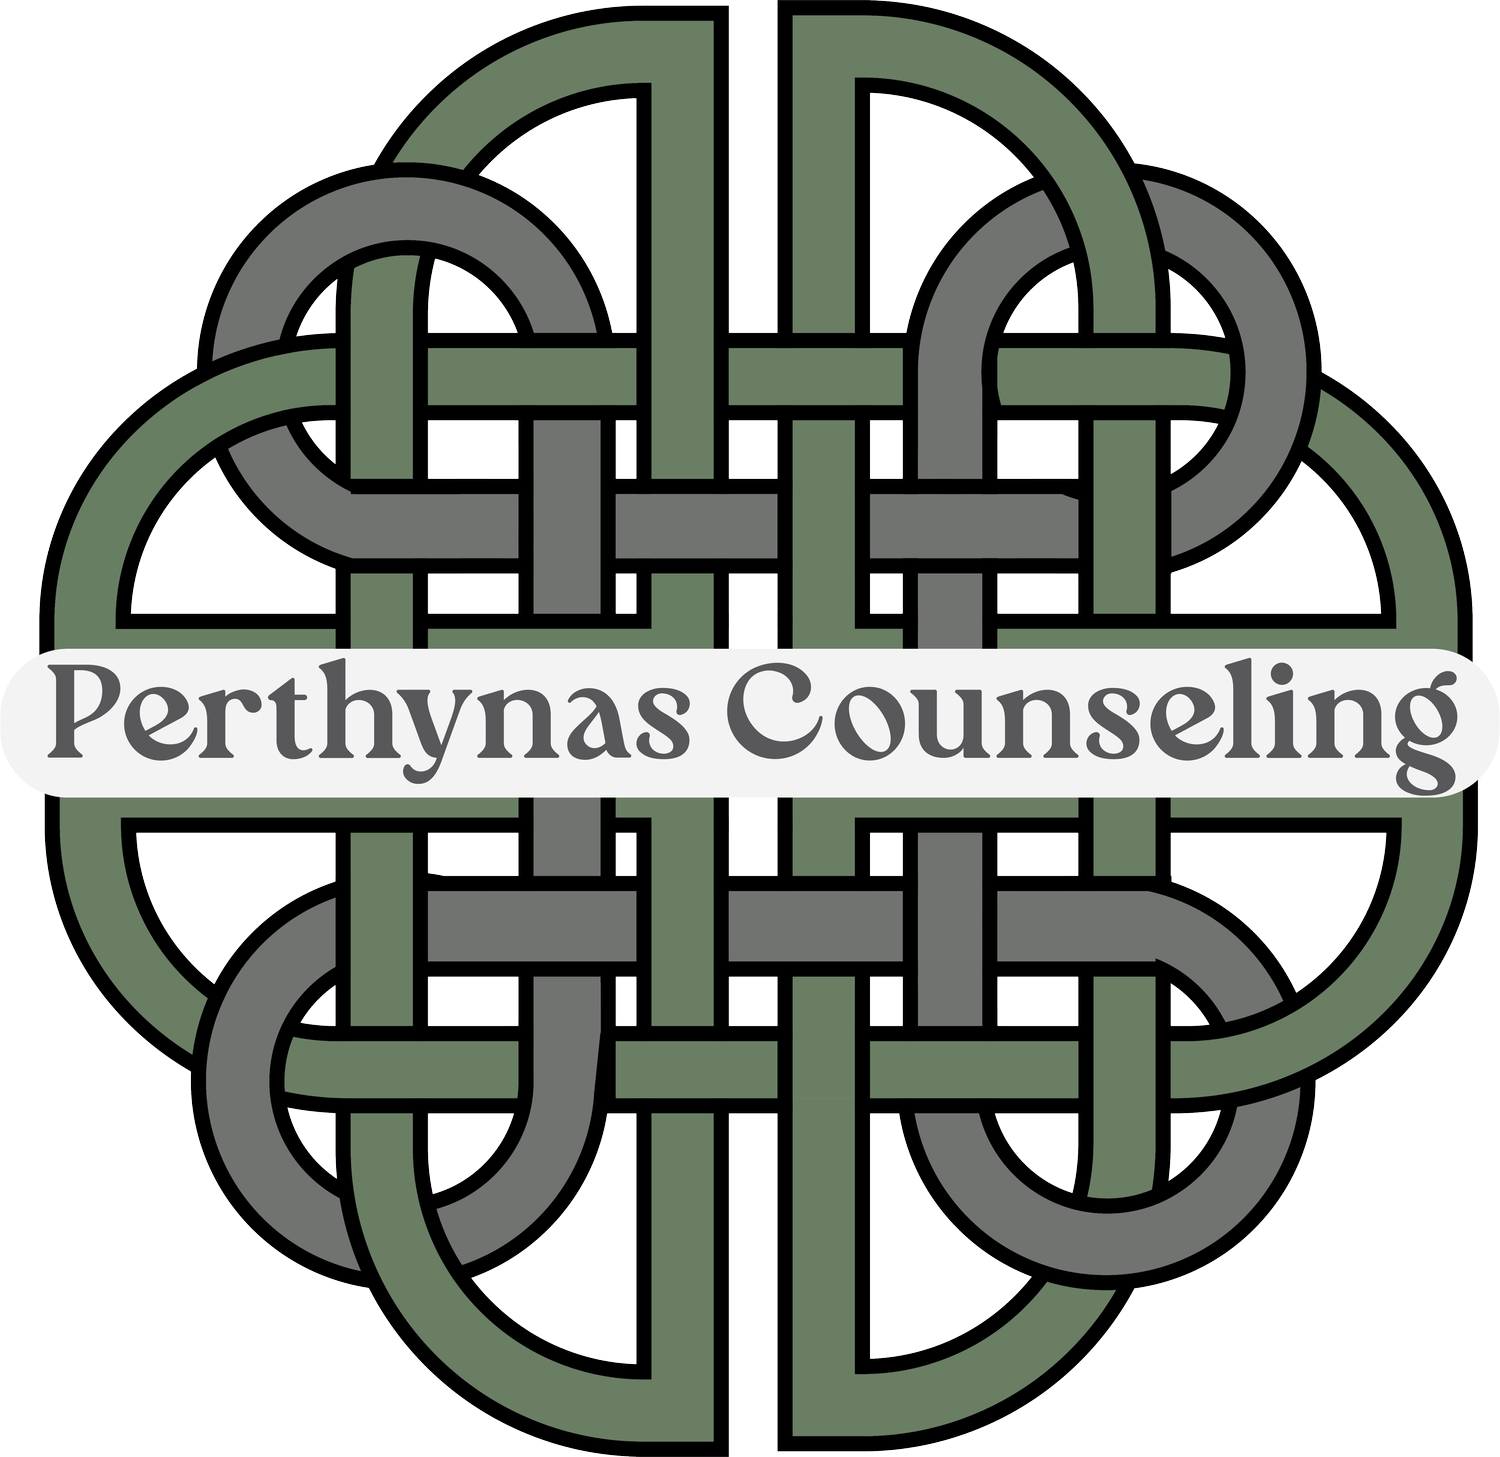 Perthynas Counseling